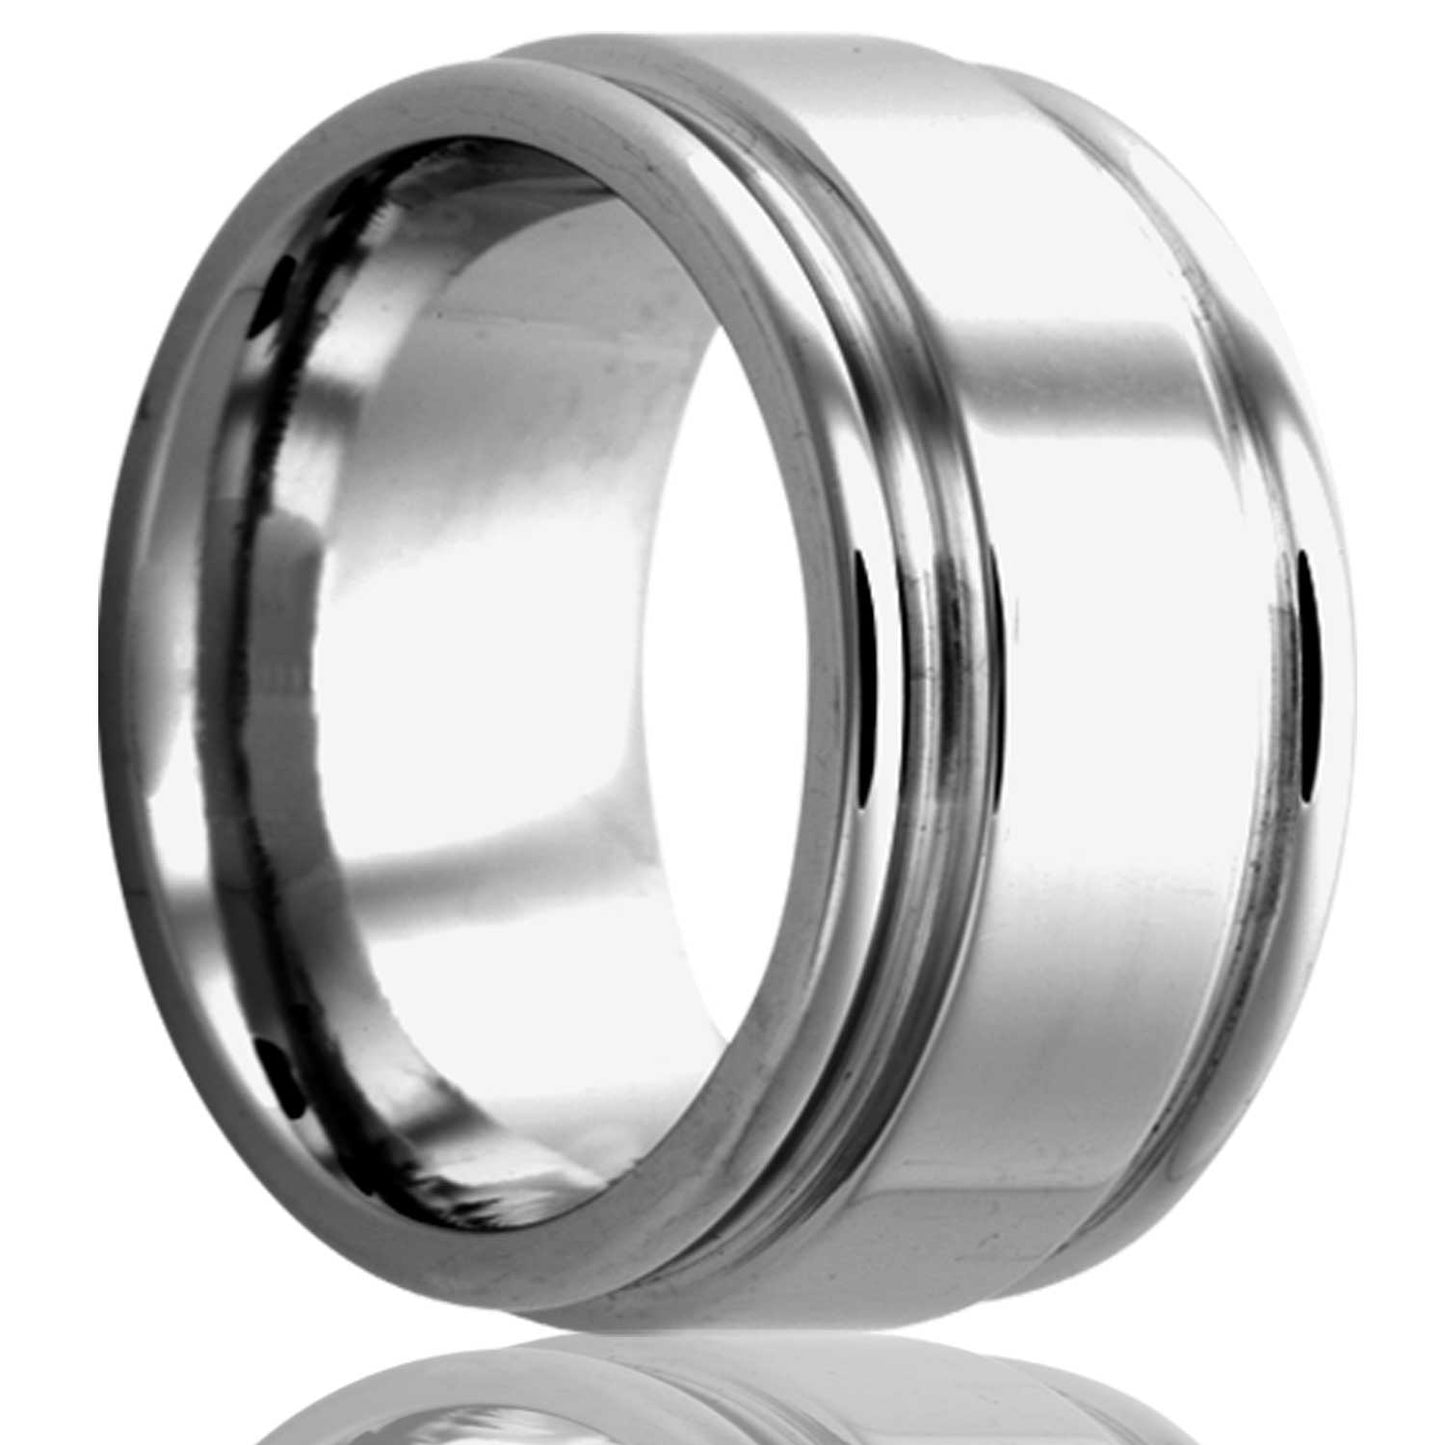 A tungsten wedding band with grooved edges displayed on a neutral white background.